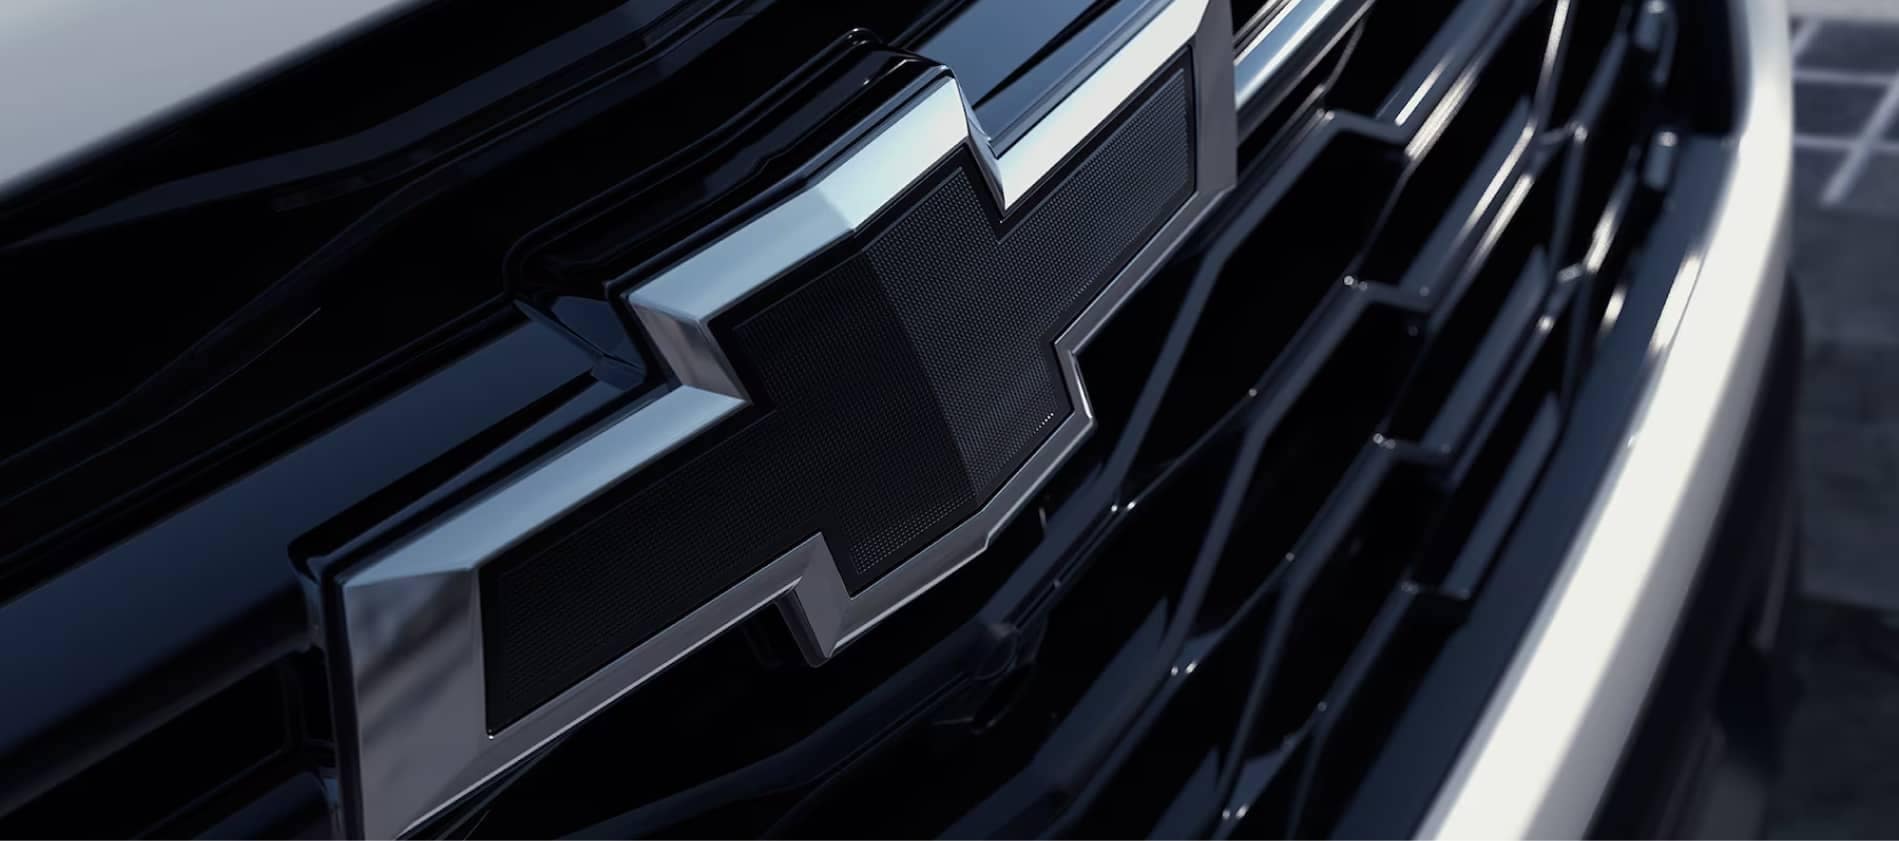 Close up view of a Chevrolet grill